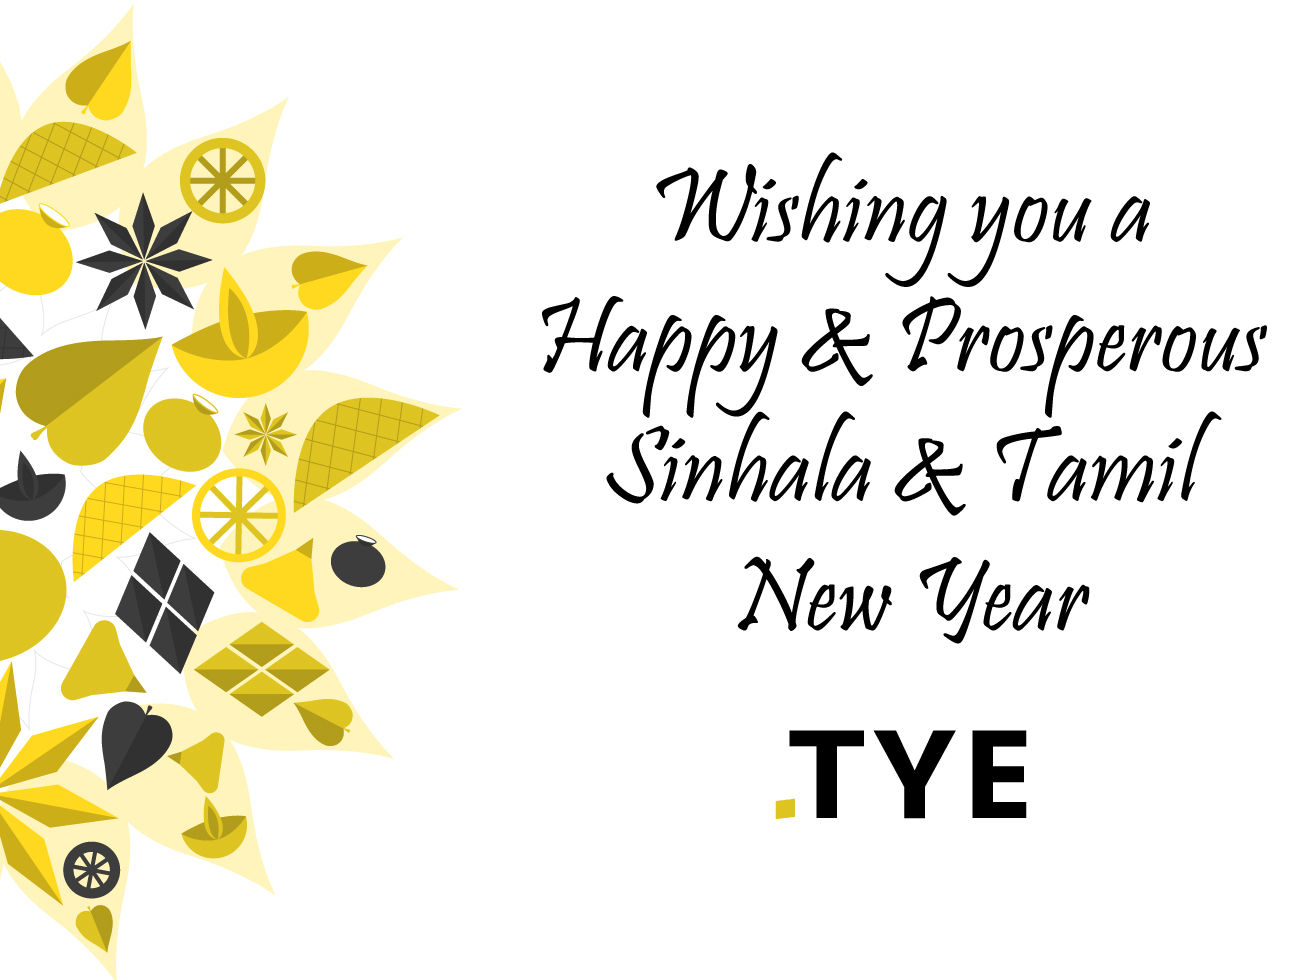 Sinhala Tamil New Year Greeting by Inhamul Hassan on Dribbble